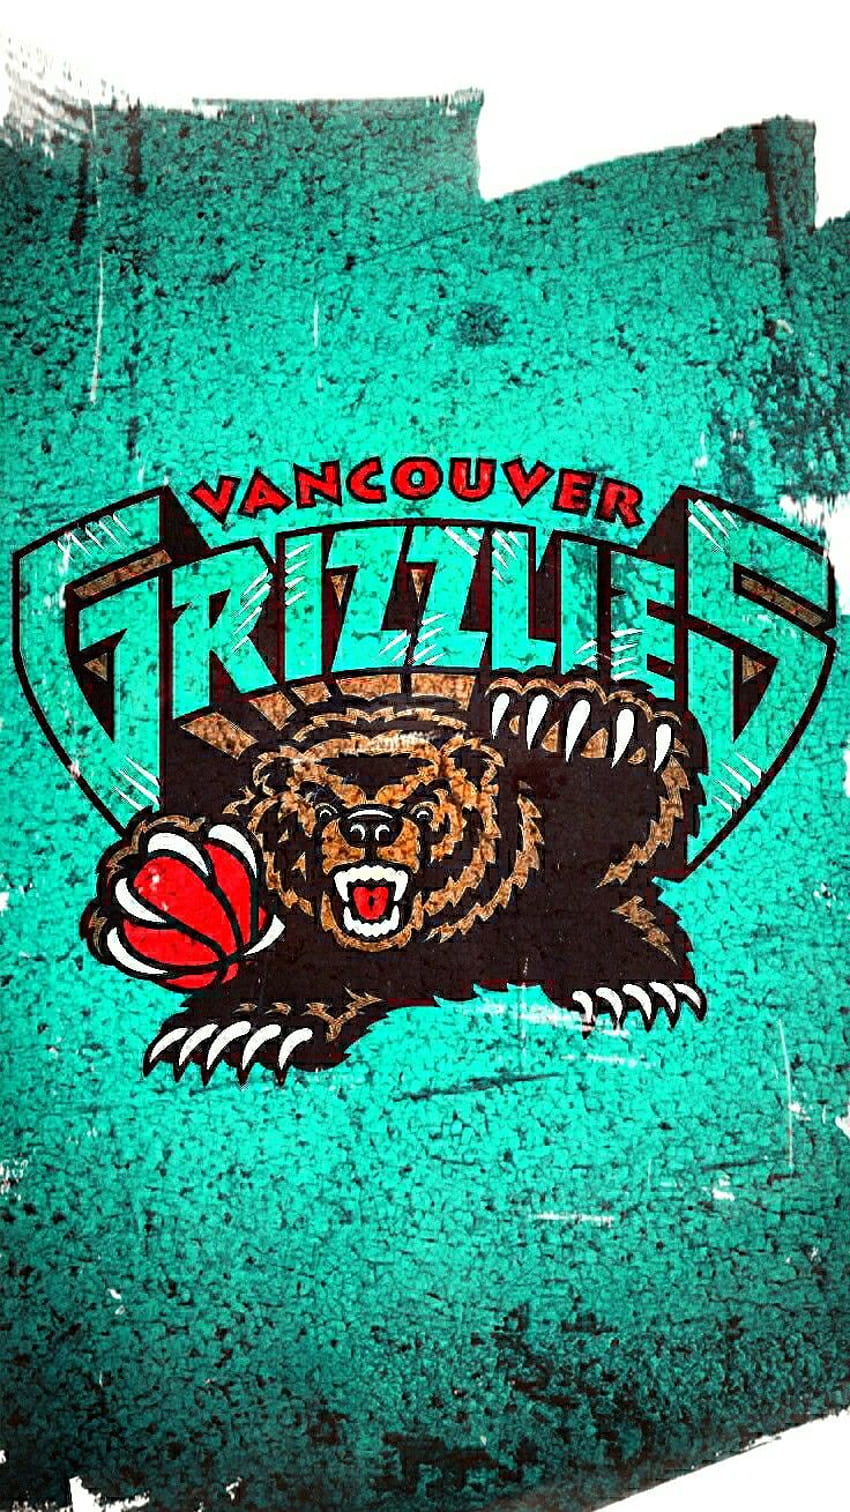 Vancouver Grizzly wallpaper ponsel HD